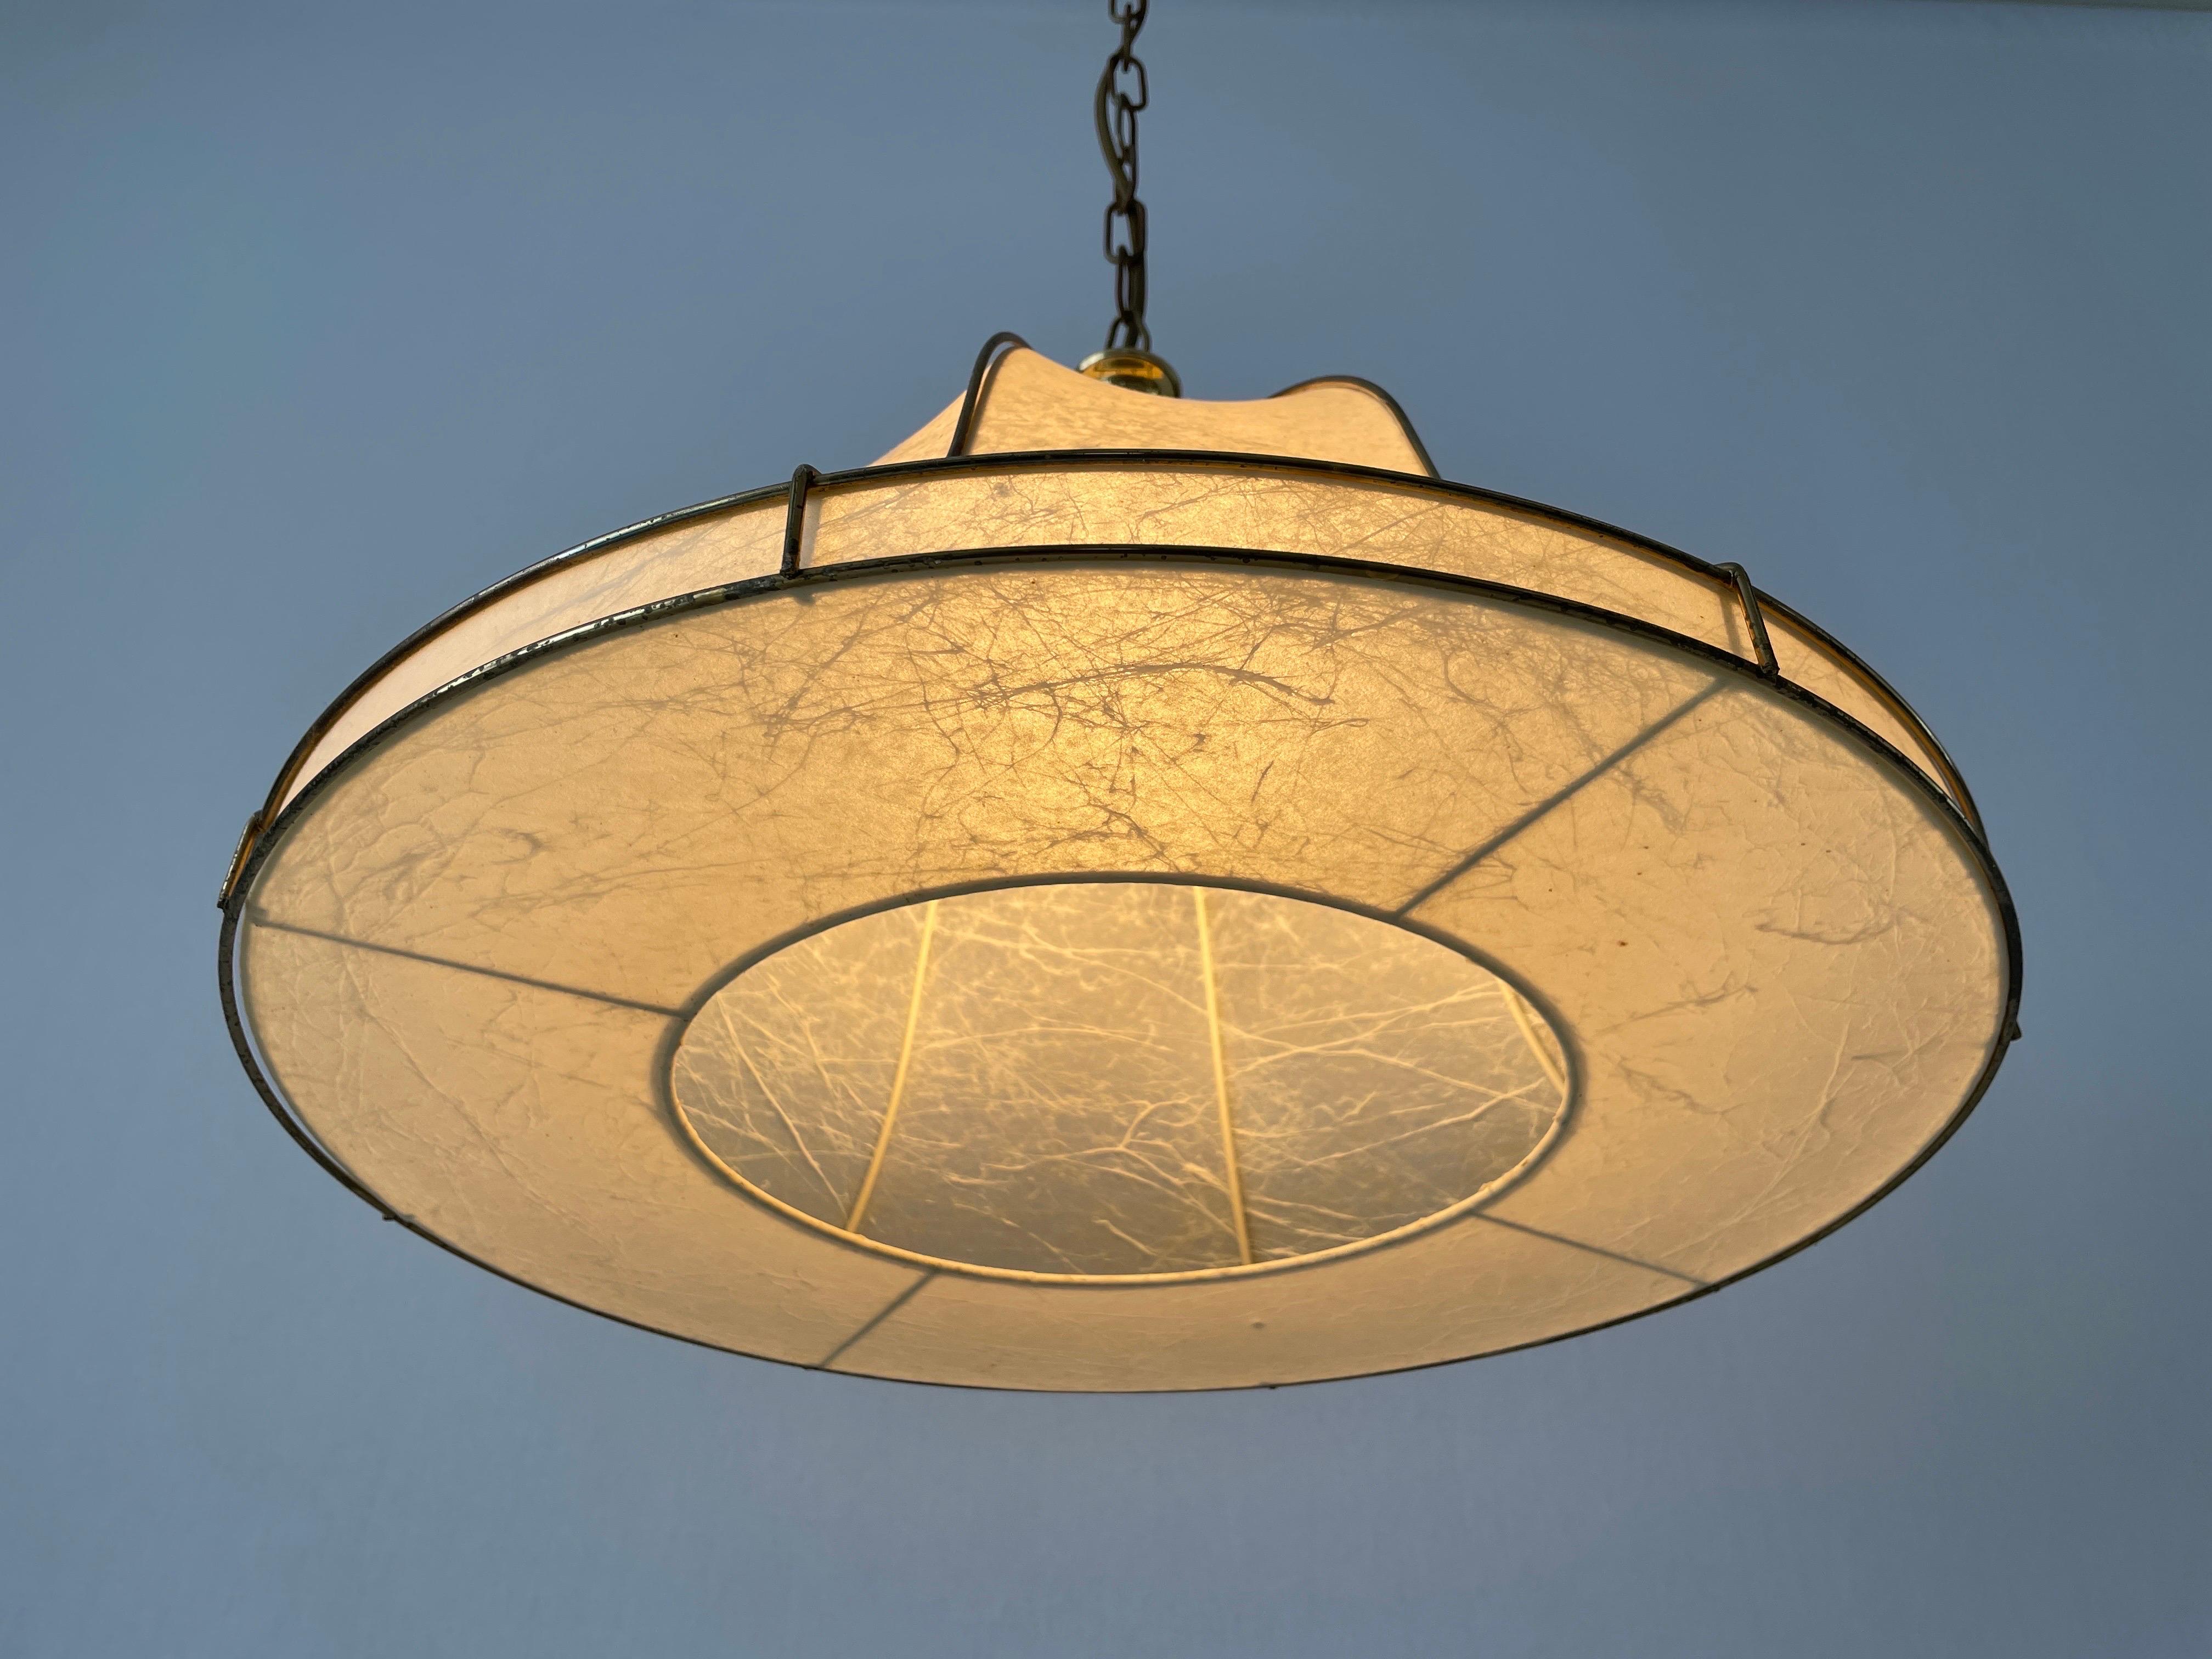 Cocoon Pendant Lamp with Gold Metal Shade Frame by Goldkant, 1960s, Germany For Sale 6